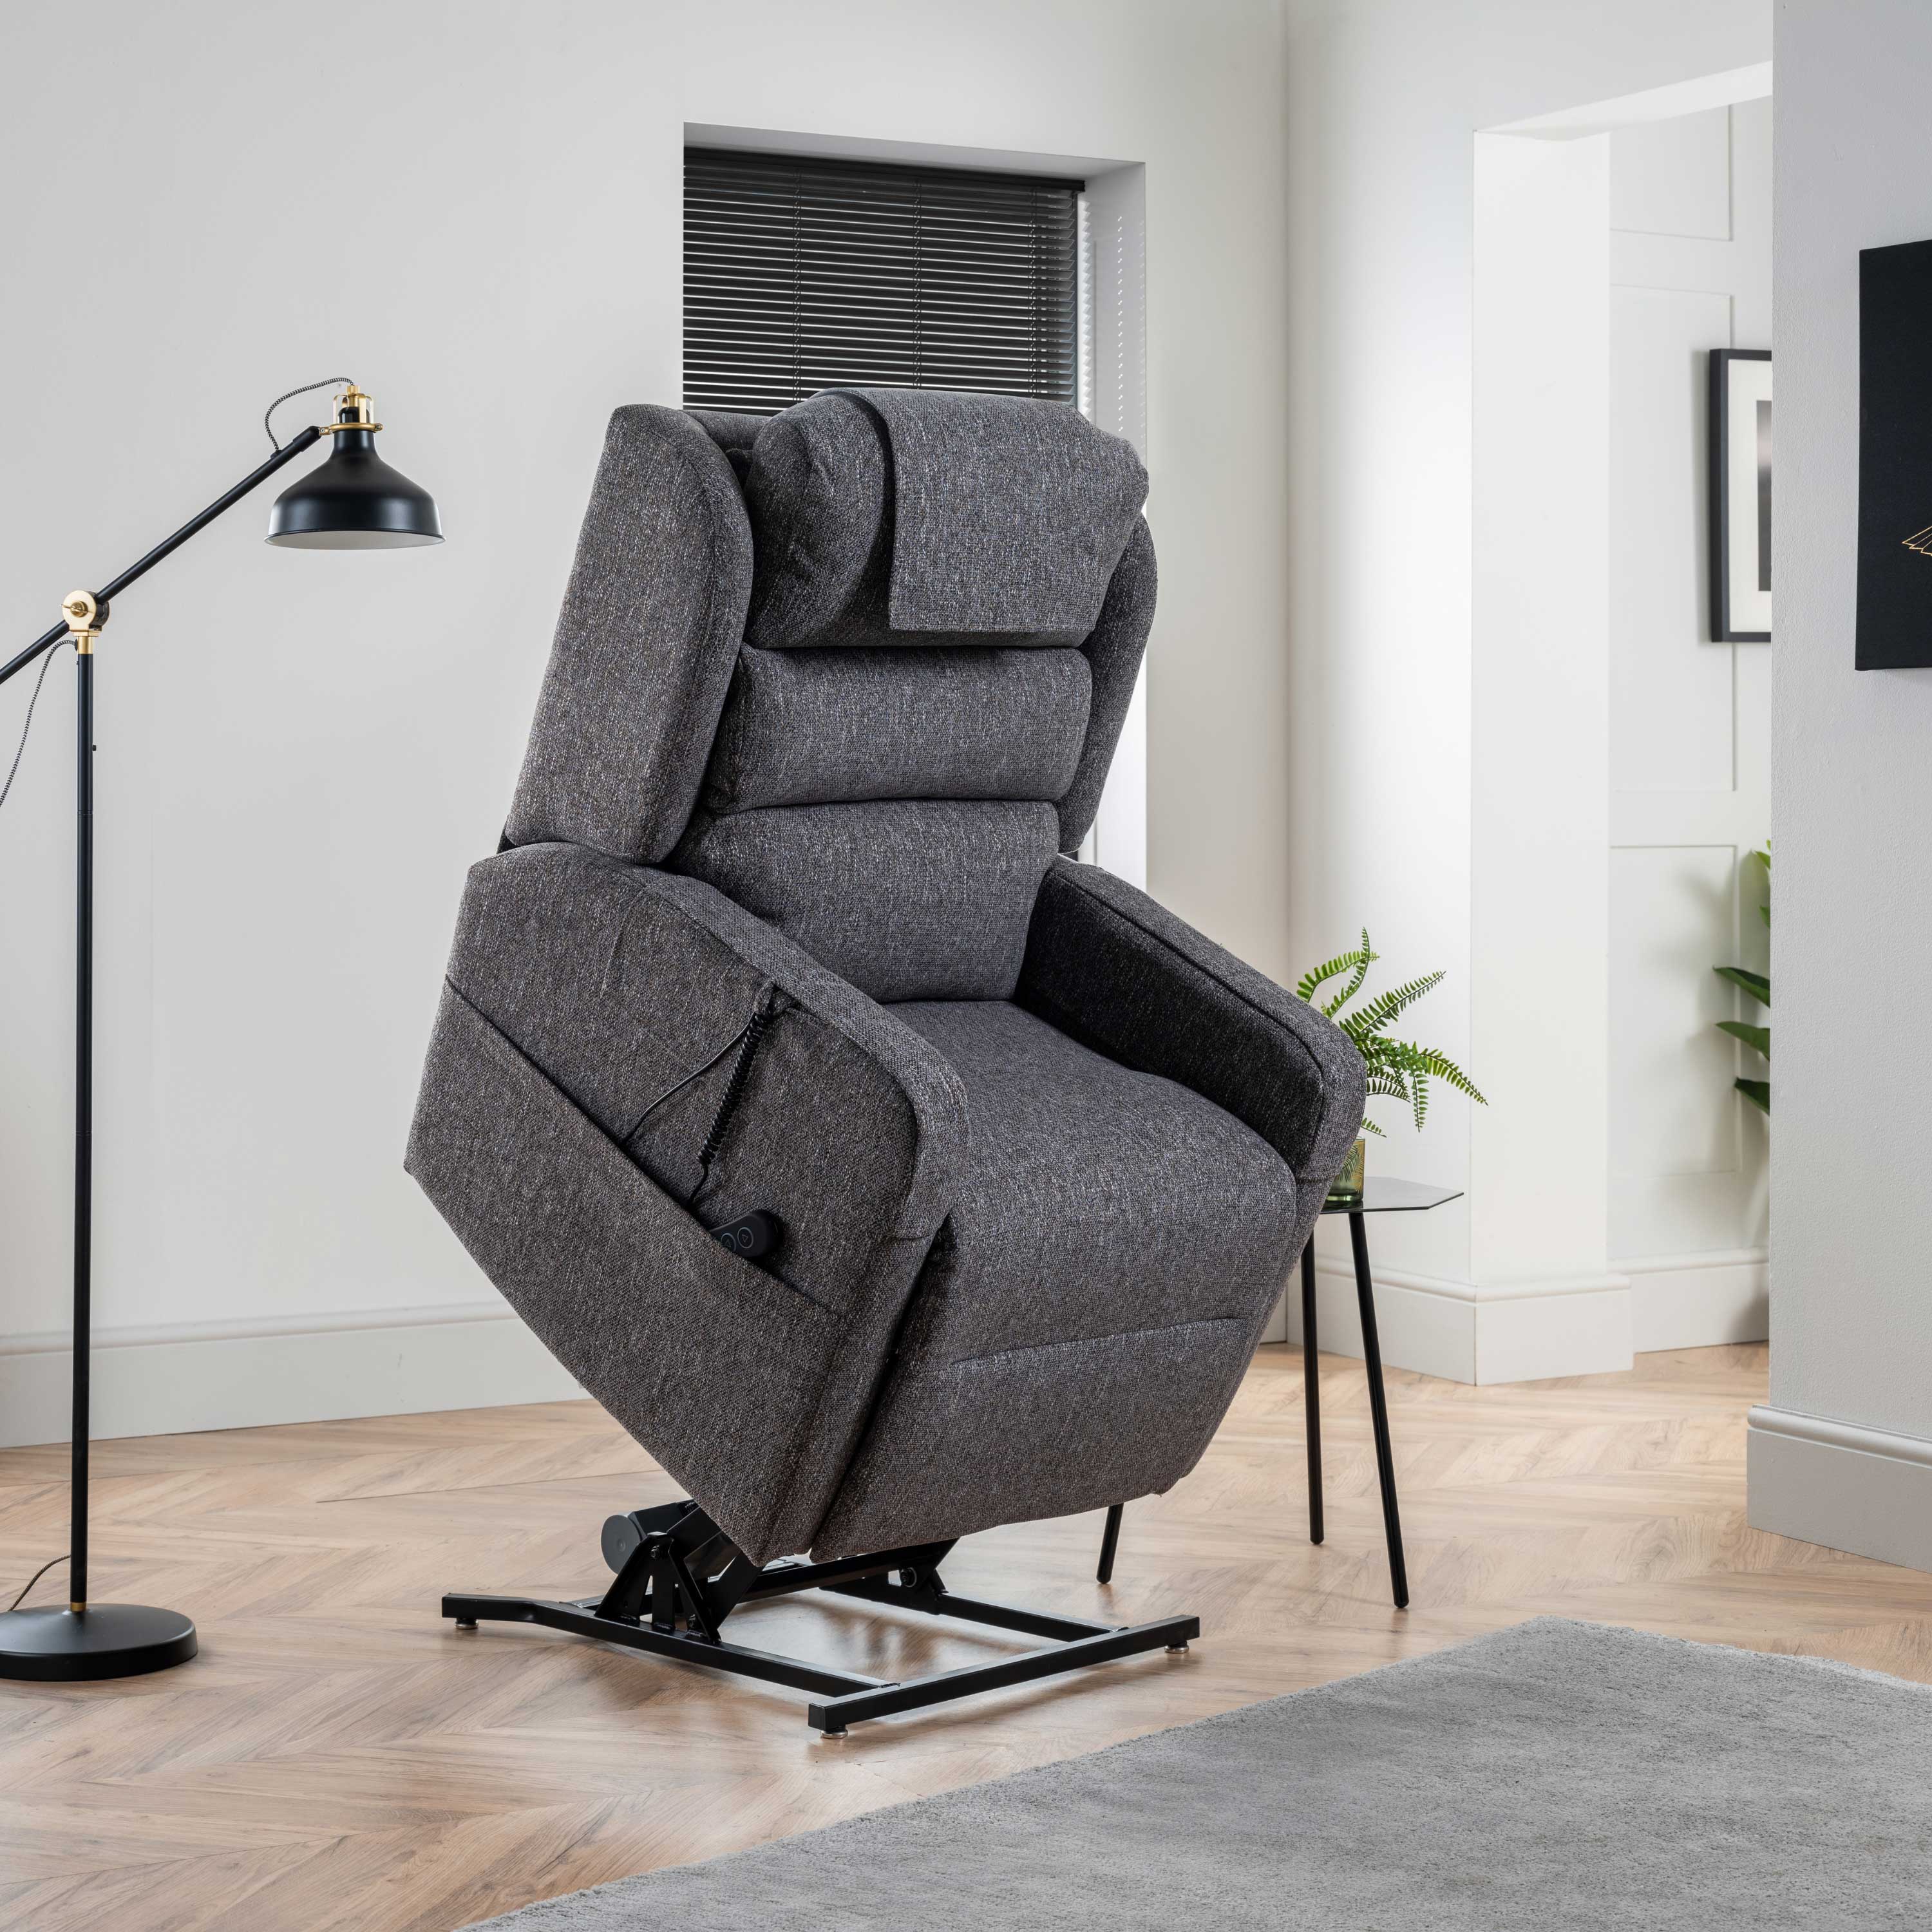 Camberley Single Motor Deluxe Rise and Recline Chair